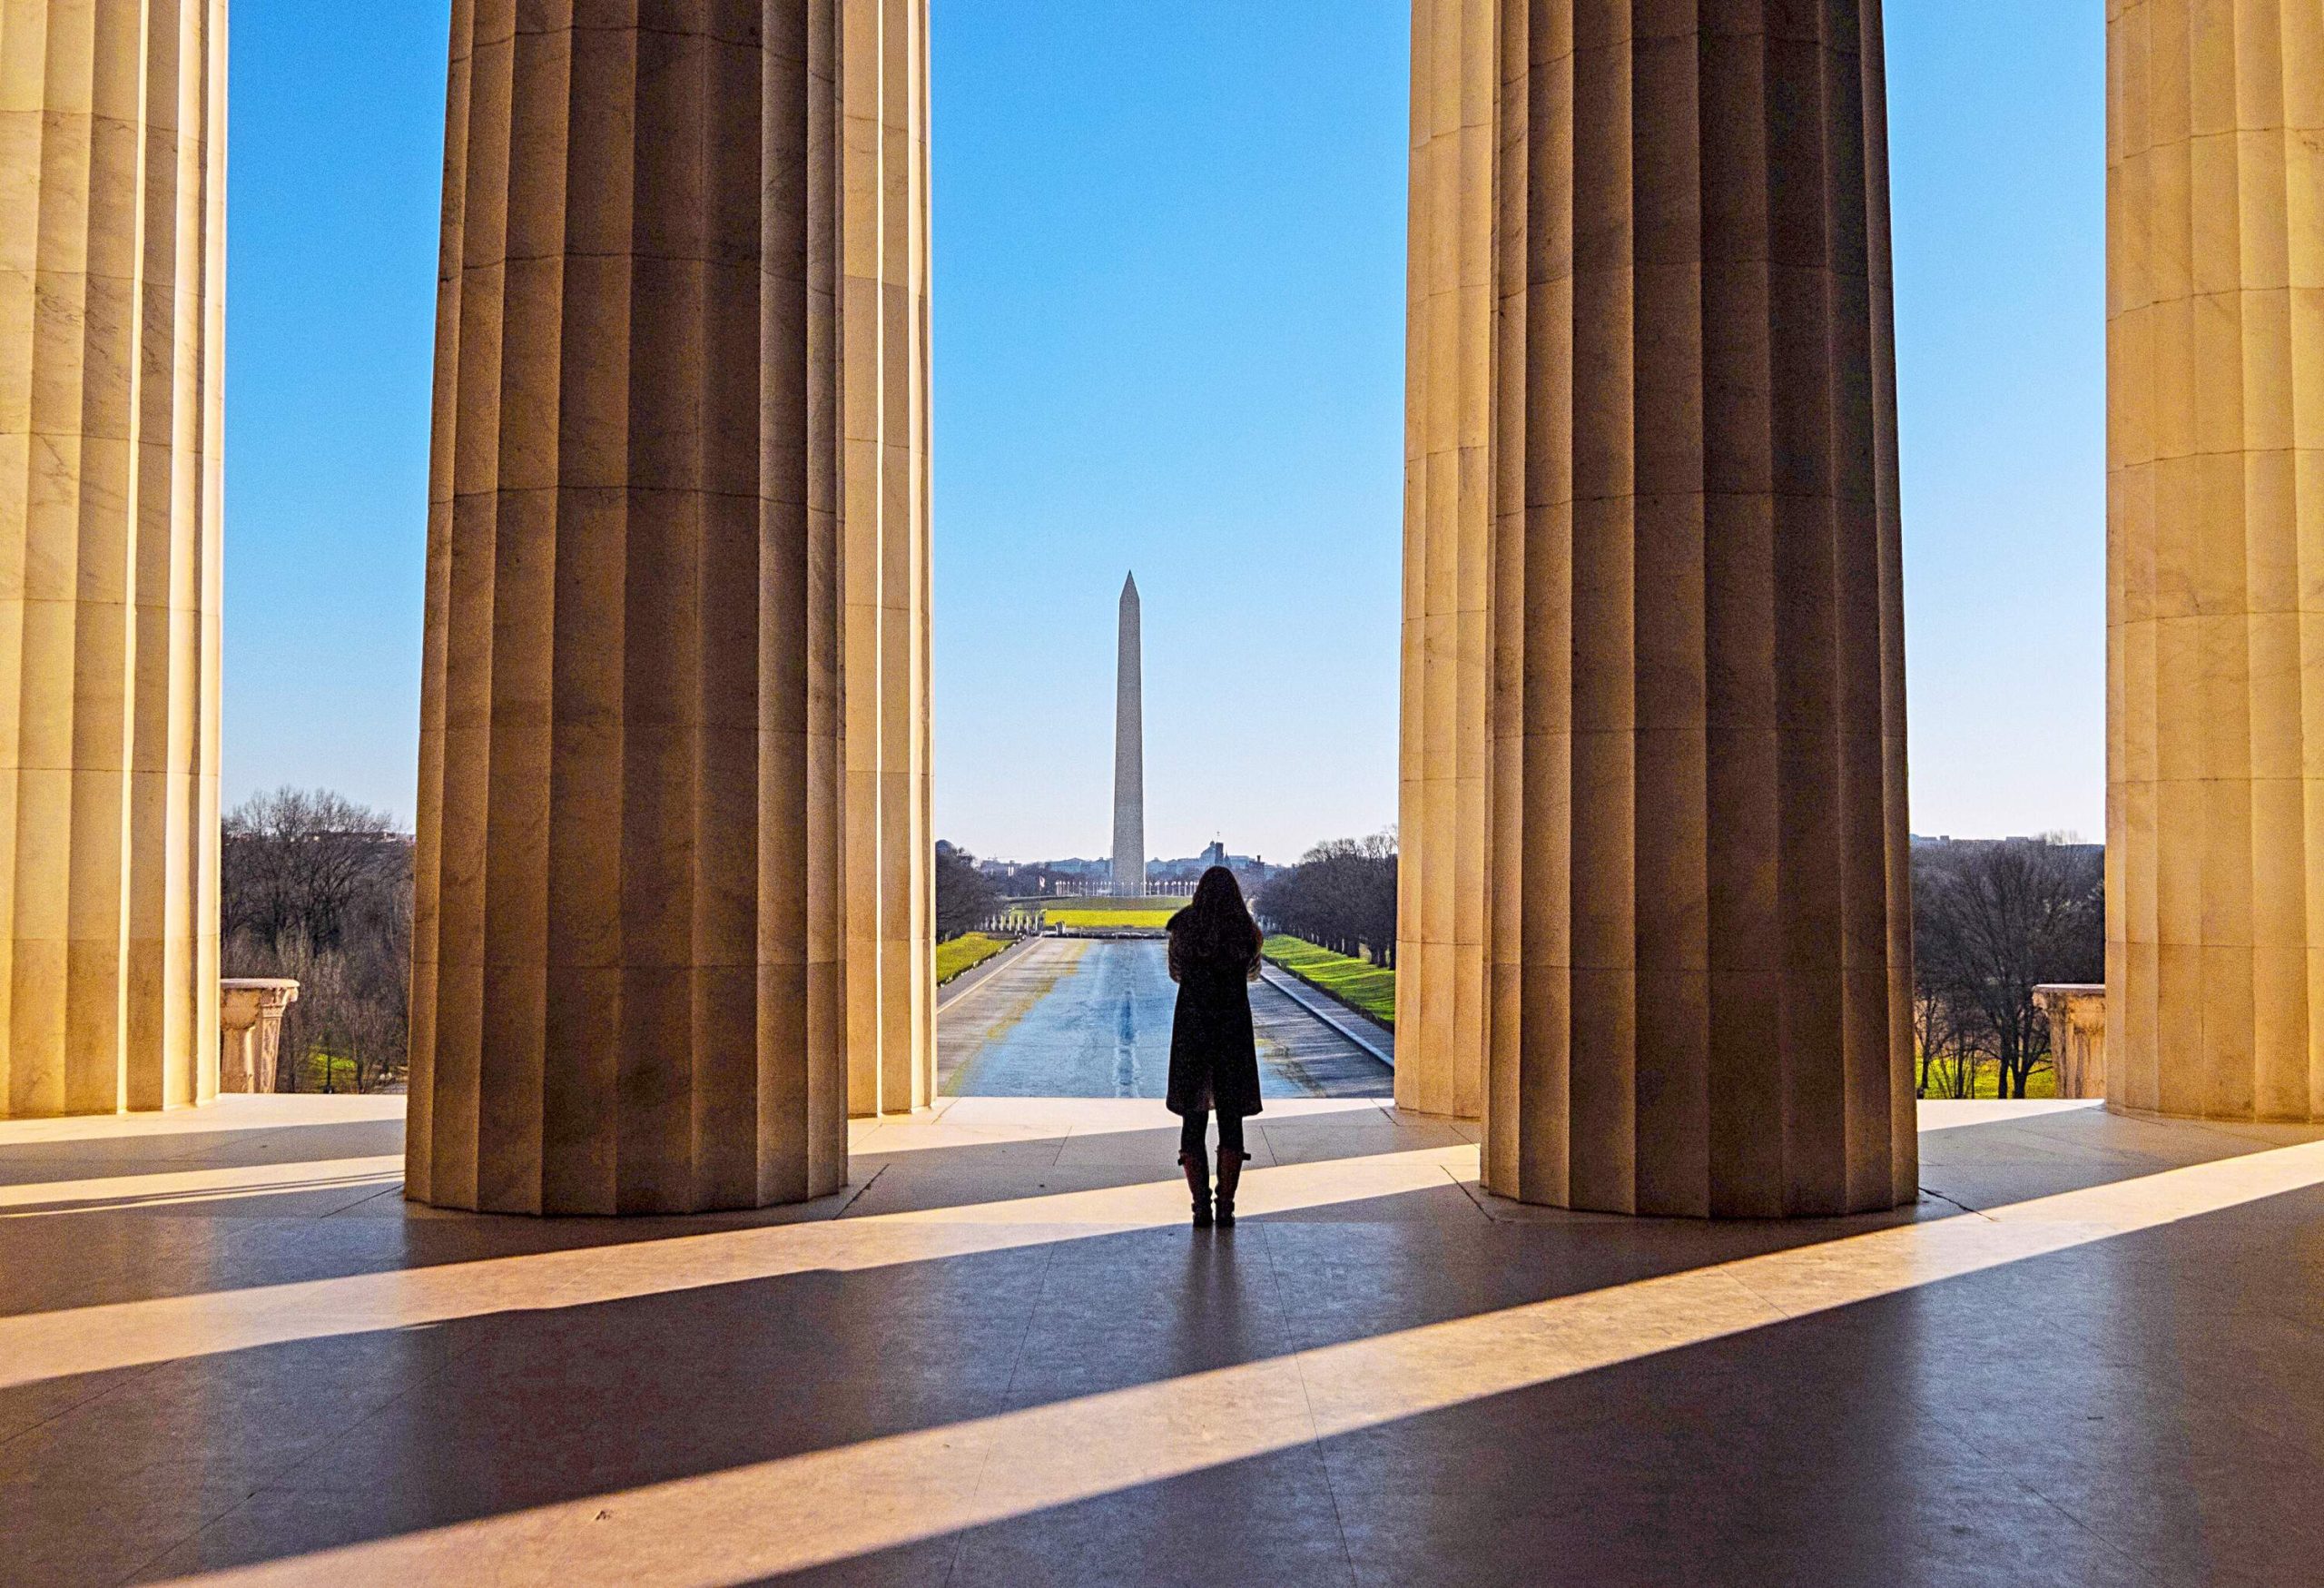 A woman standing between colossal fluted columns, with the Washington Monument in the backdrop.